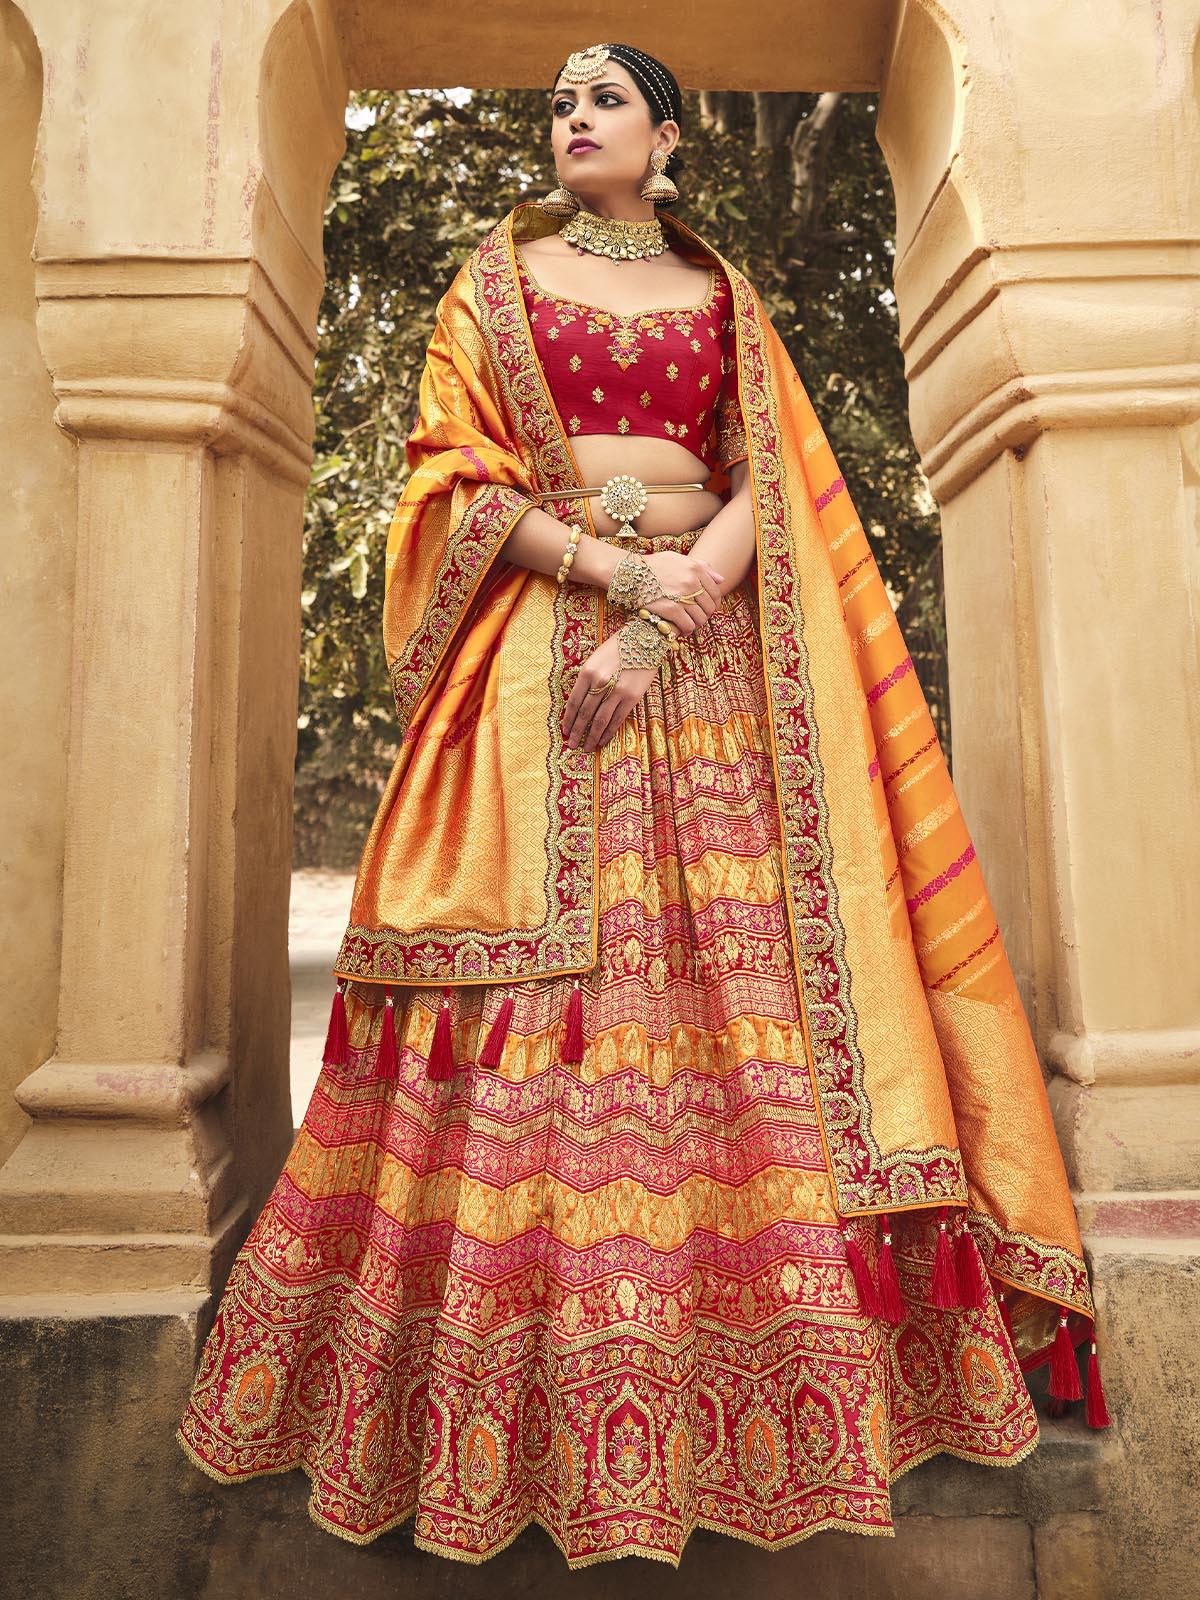 Mustard, Red and Pink Weaving Silk Floral Embroidered Lehenga Choli With Dupatta - Odette